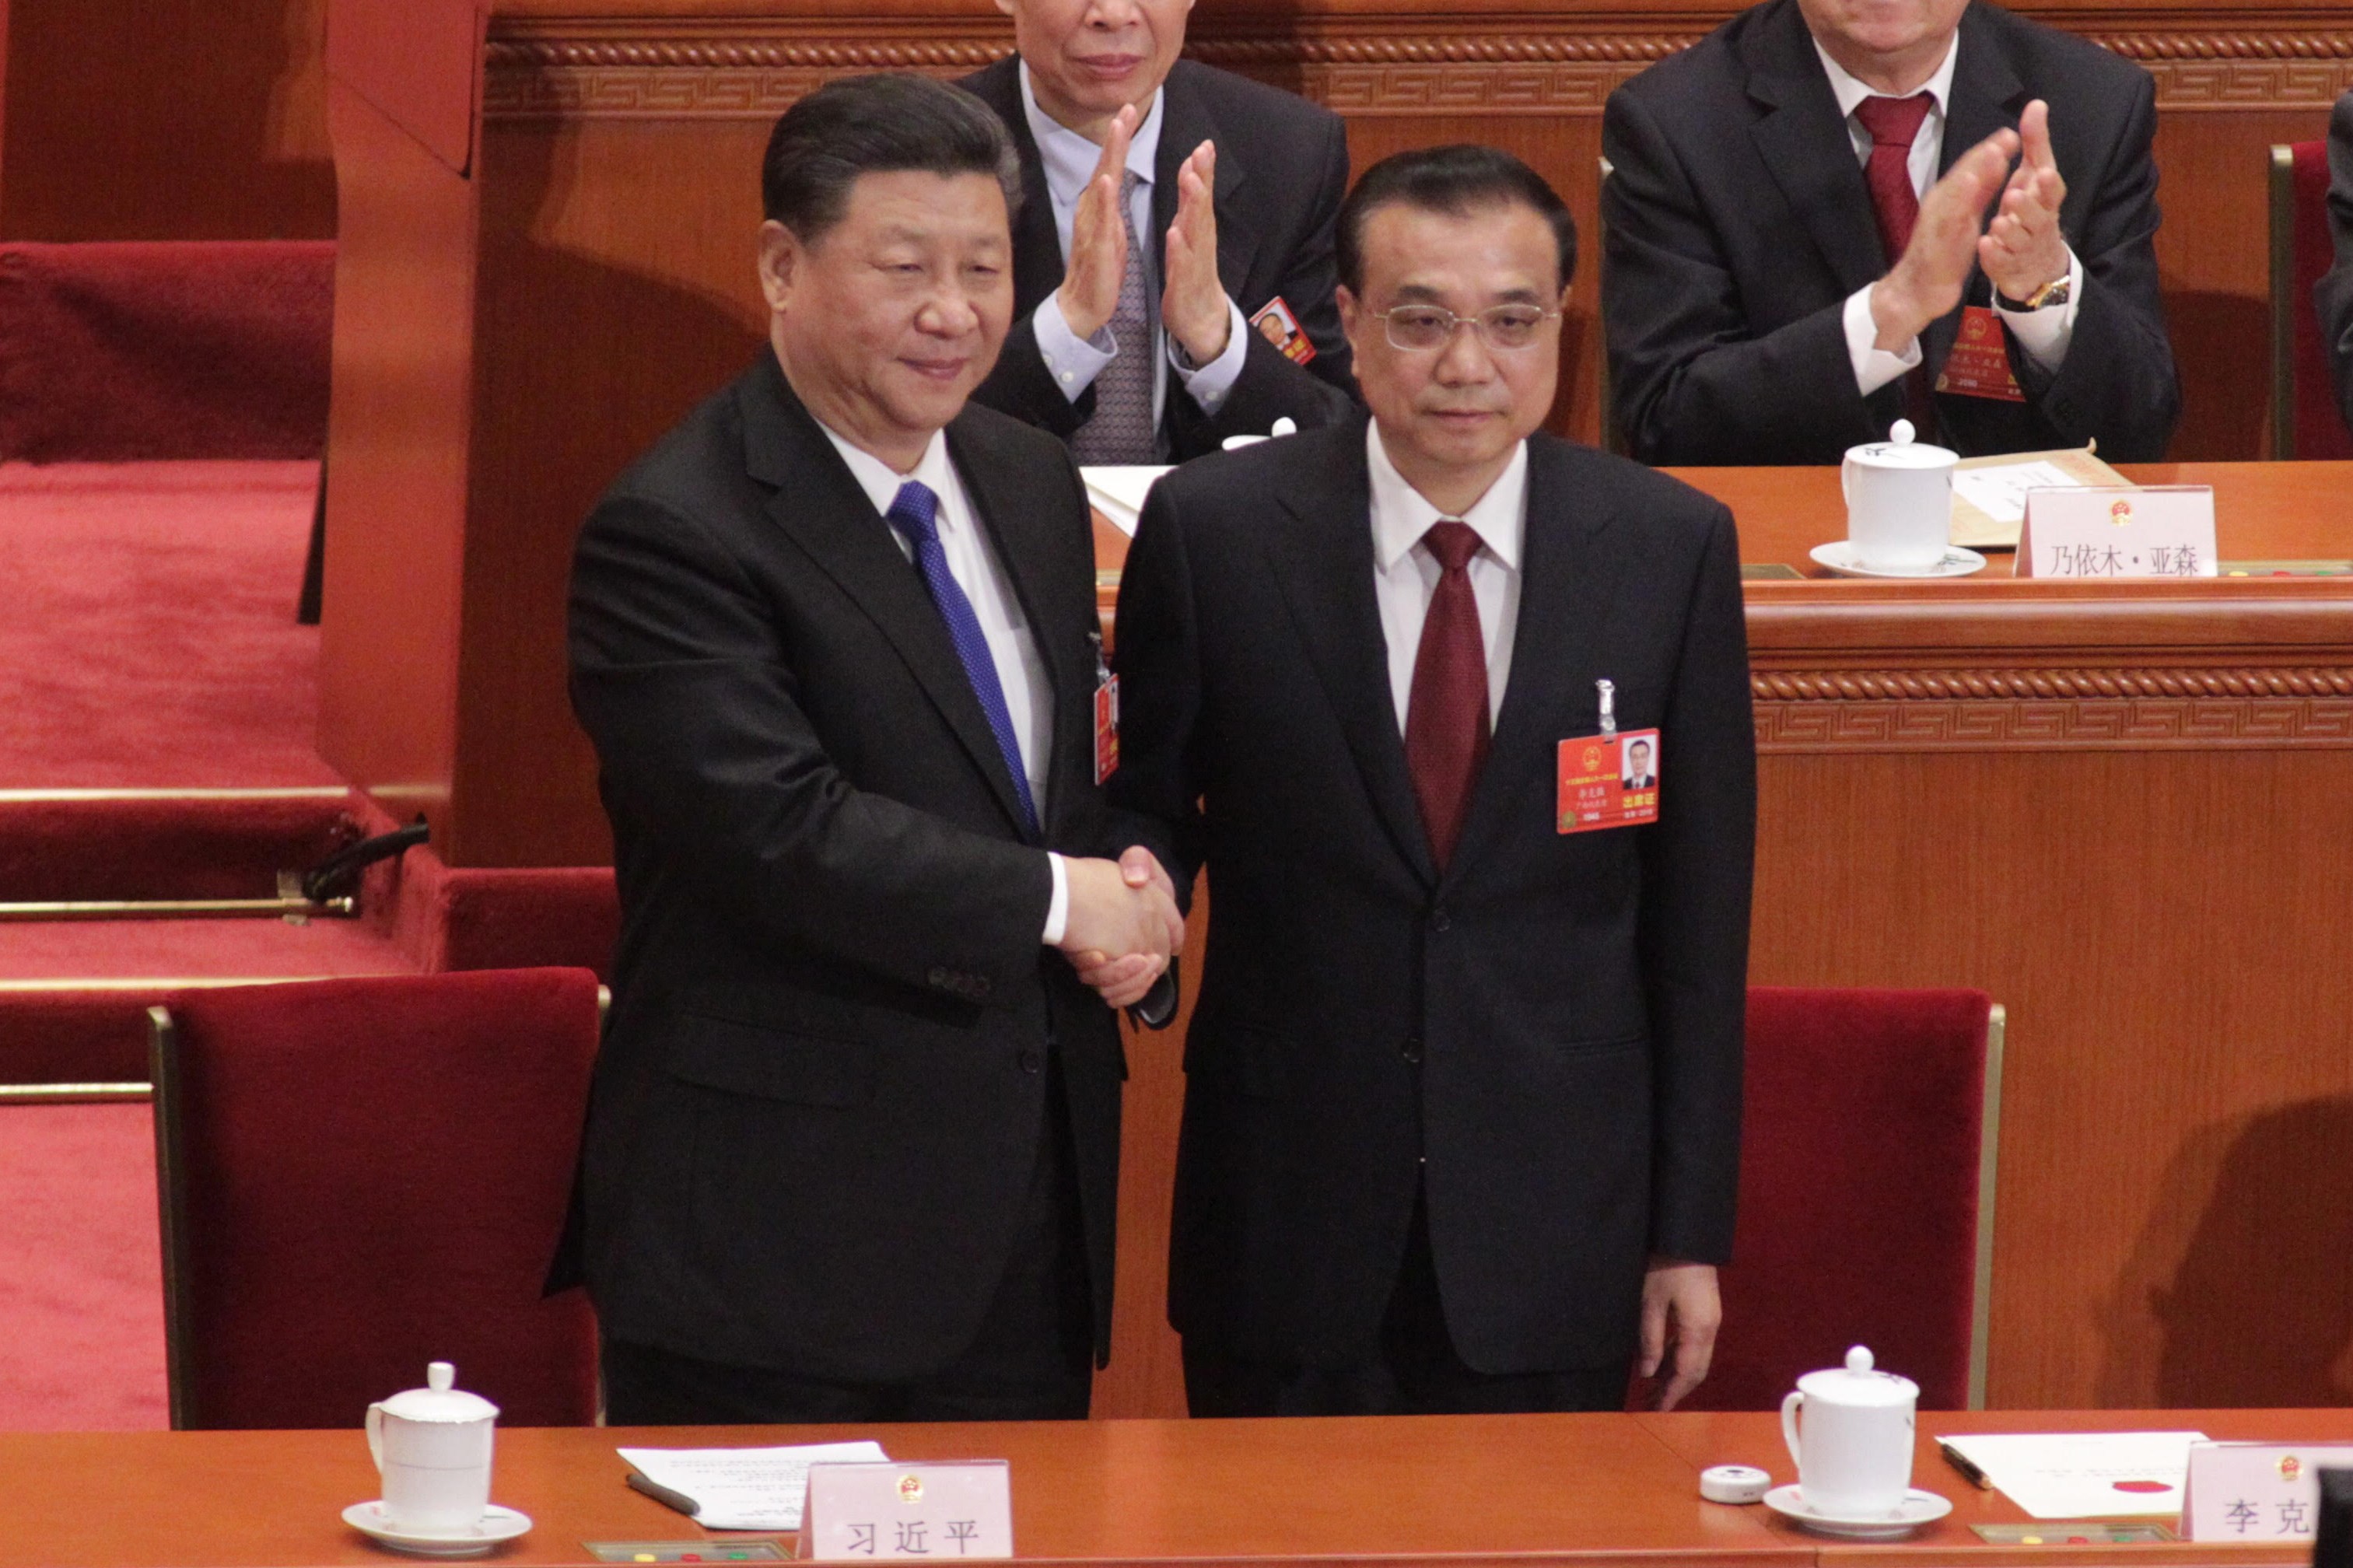 Premier Li Keqiang (right) shakes hands with President Xi Jinping at the Great Hall of the People in Beijing on Sunday after his government position was confirmed for another five years. Photo: Simon Song